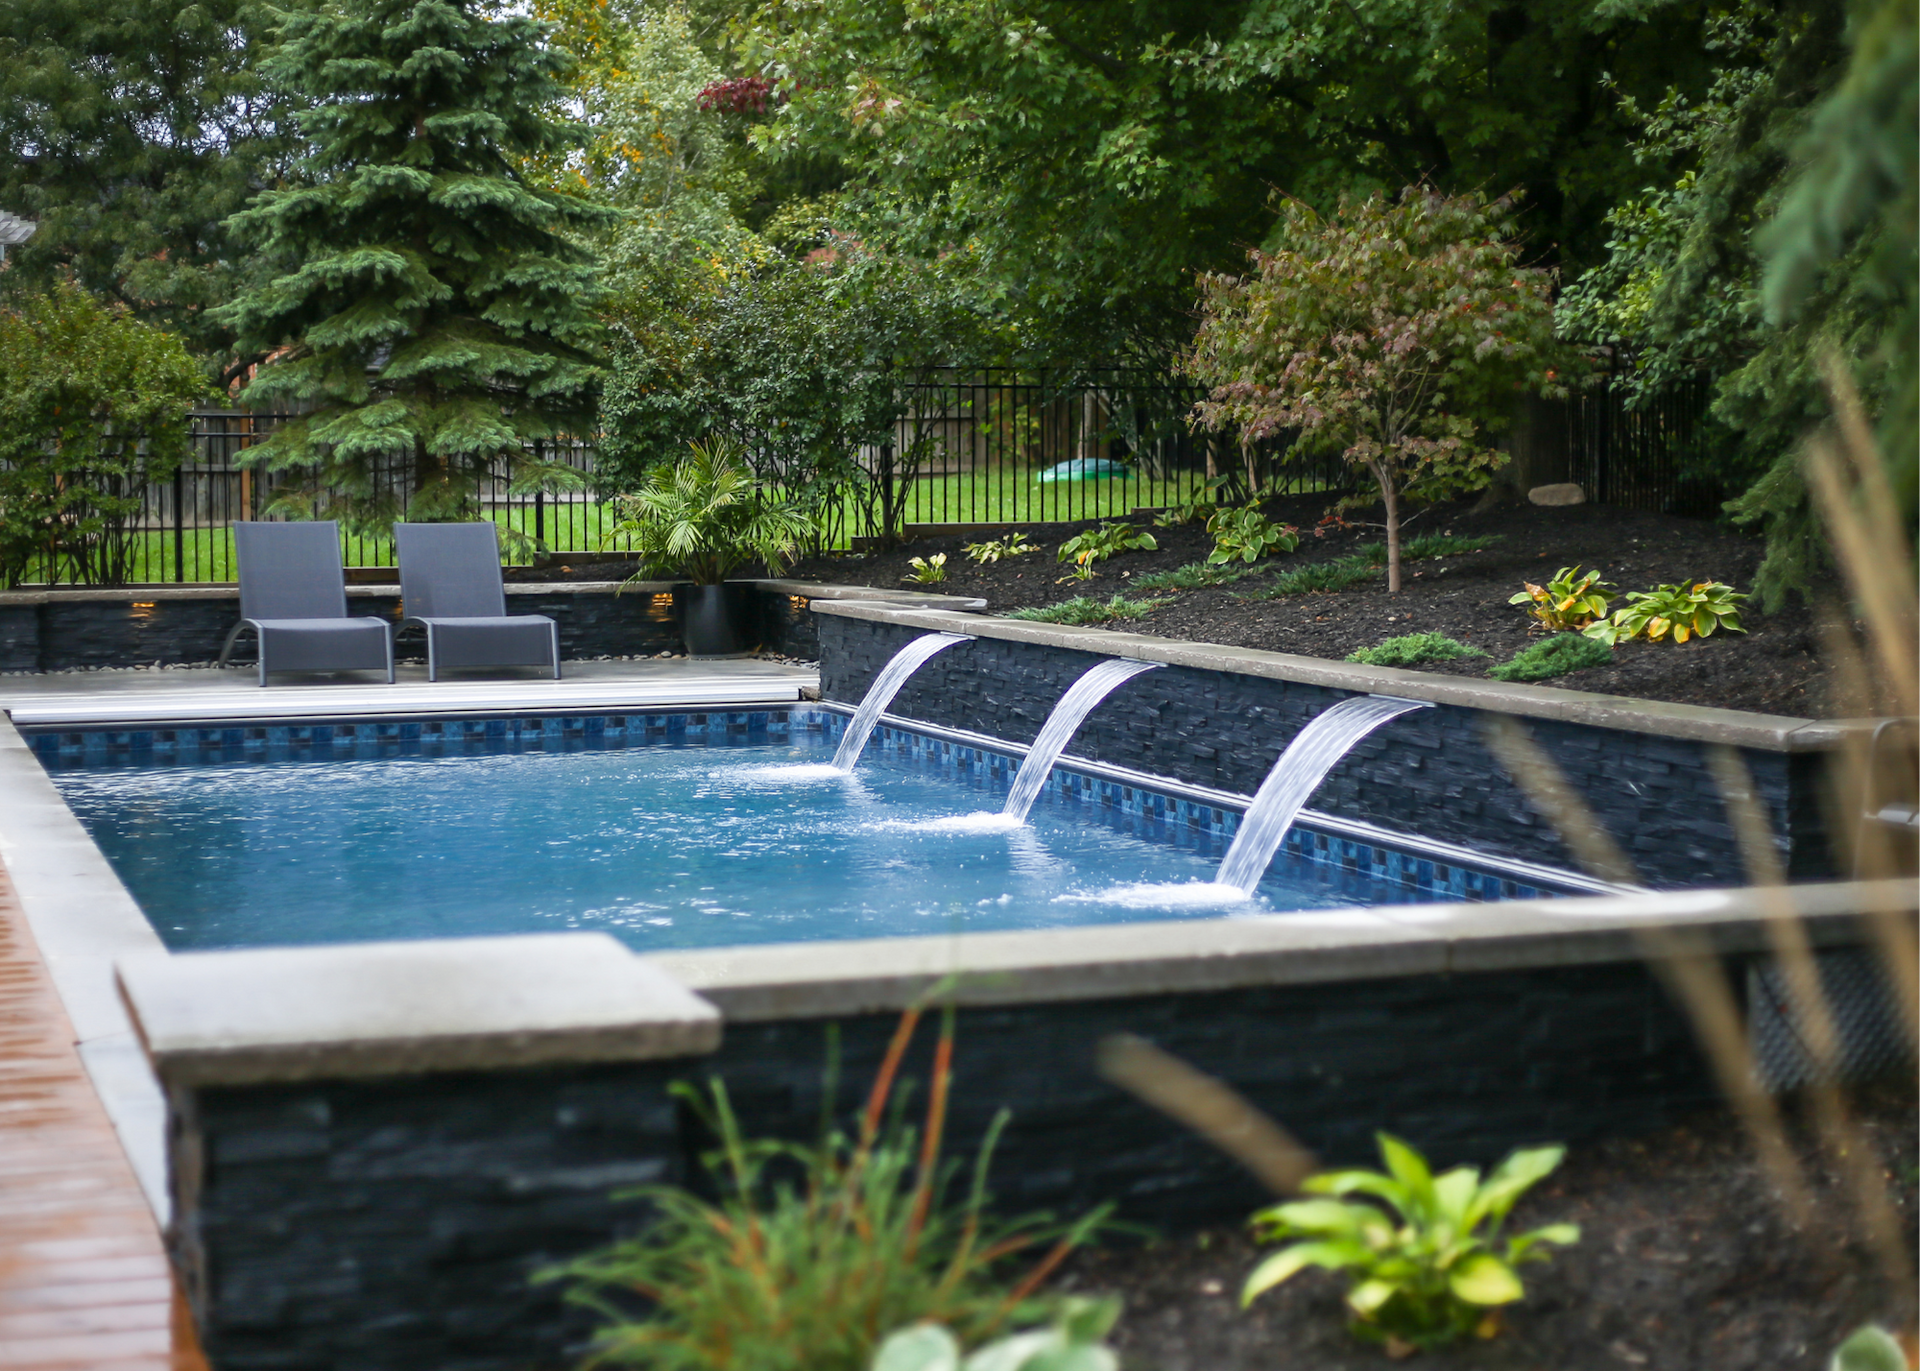 Pool with planting beds